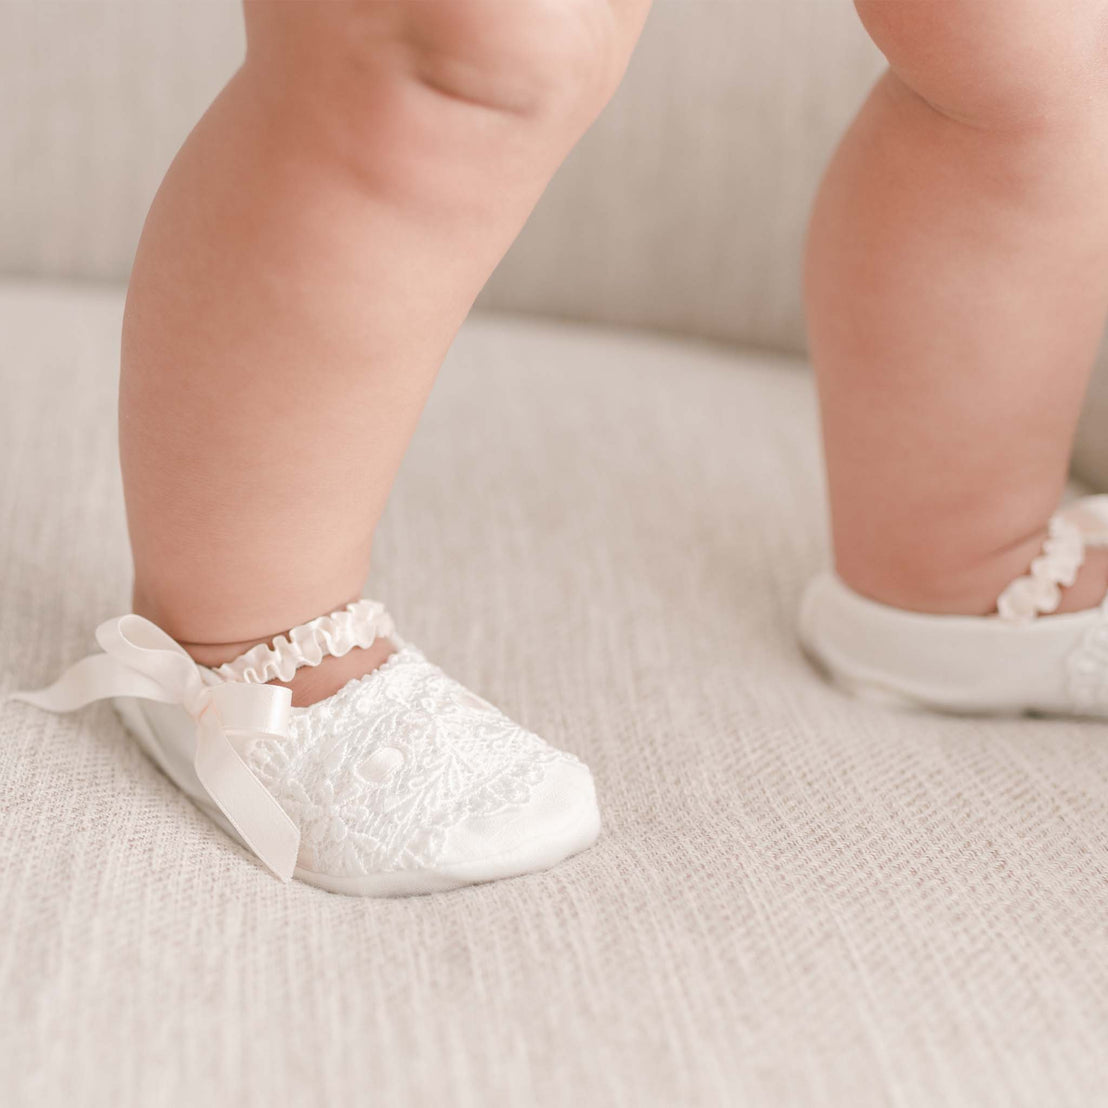 Close-up of a newborn's feet wearing white lace Emma Booties with ribbon ties for a christening, on a soft beige surface.